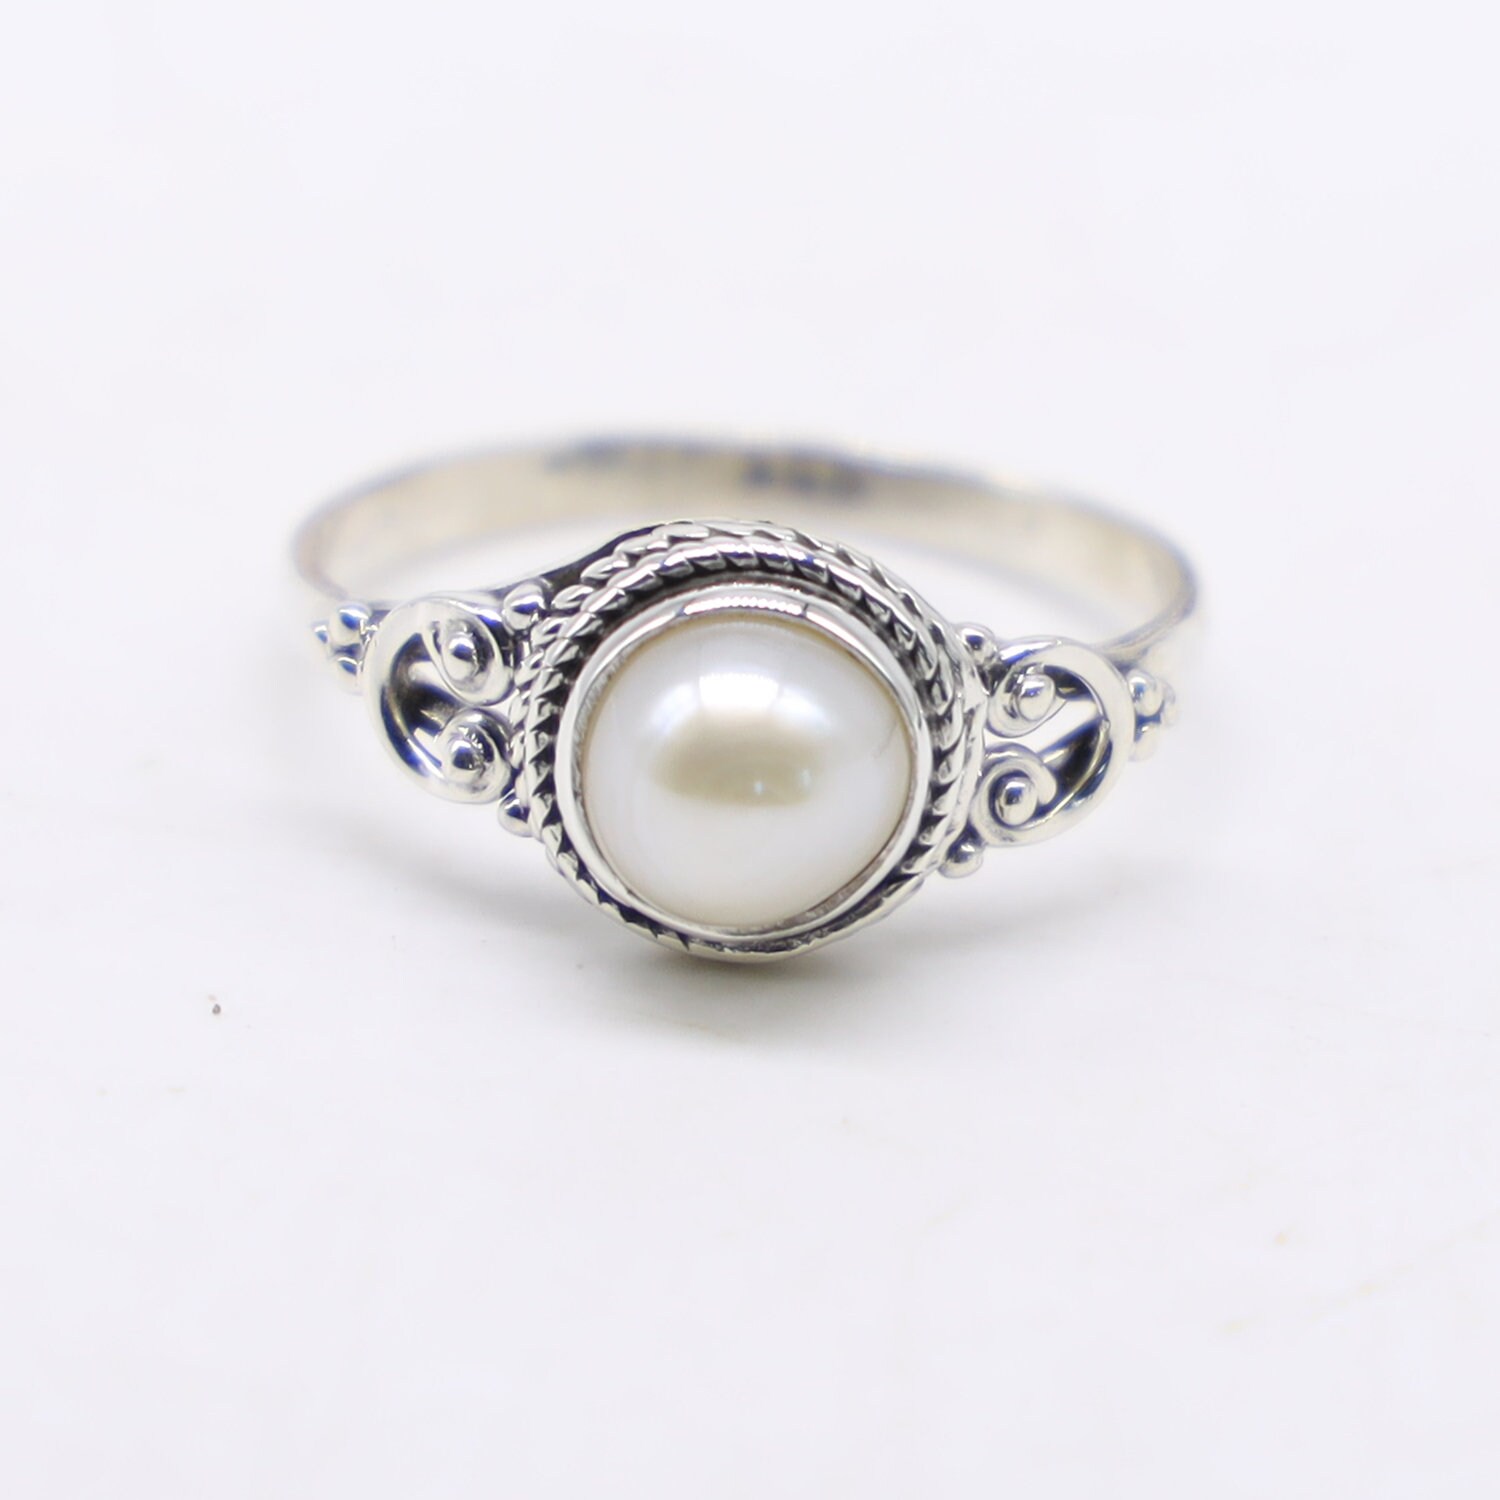 Pearl 925 Silver Plated Ethnic Handmade Jewelry Ring US Size 9.5 R-18521